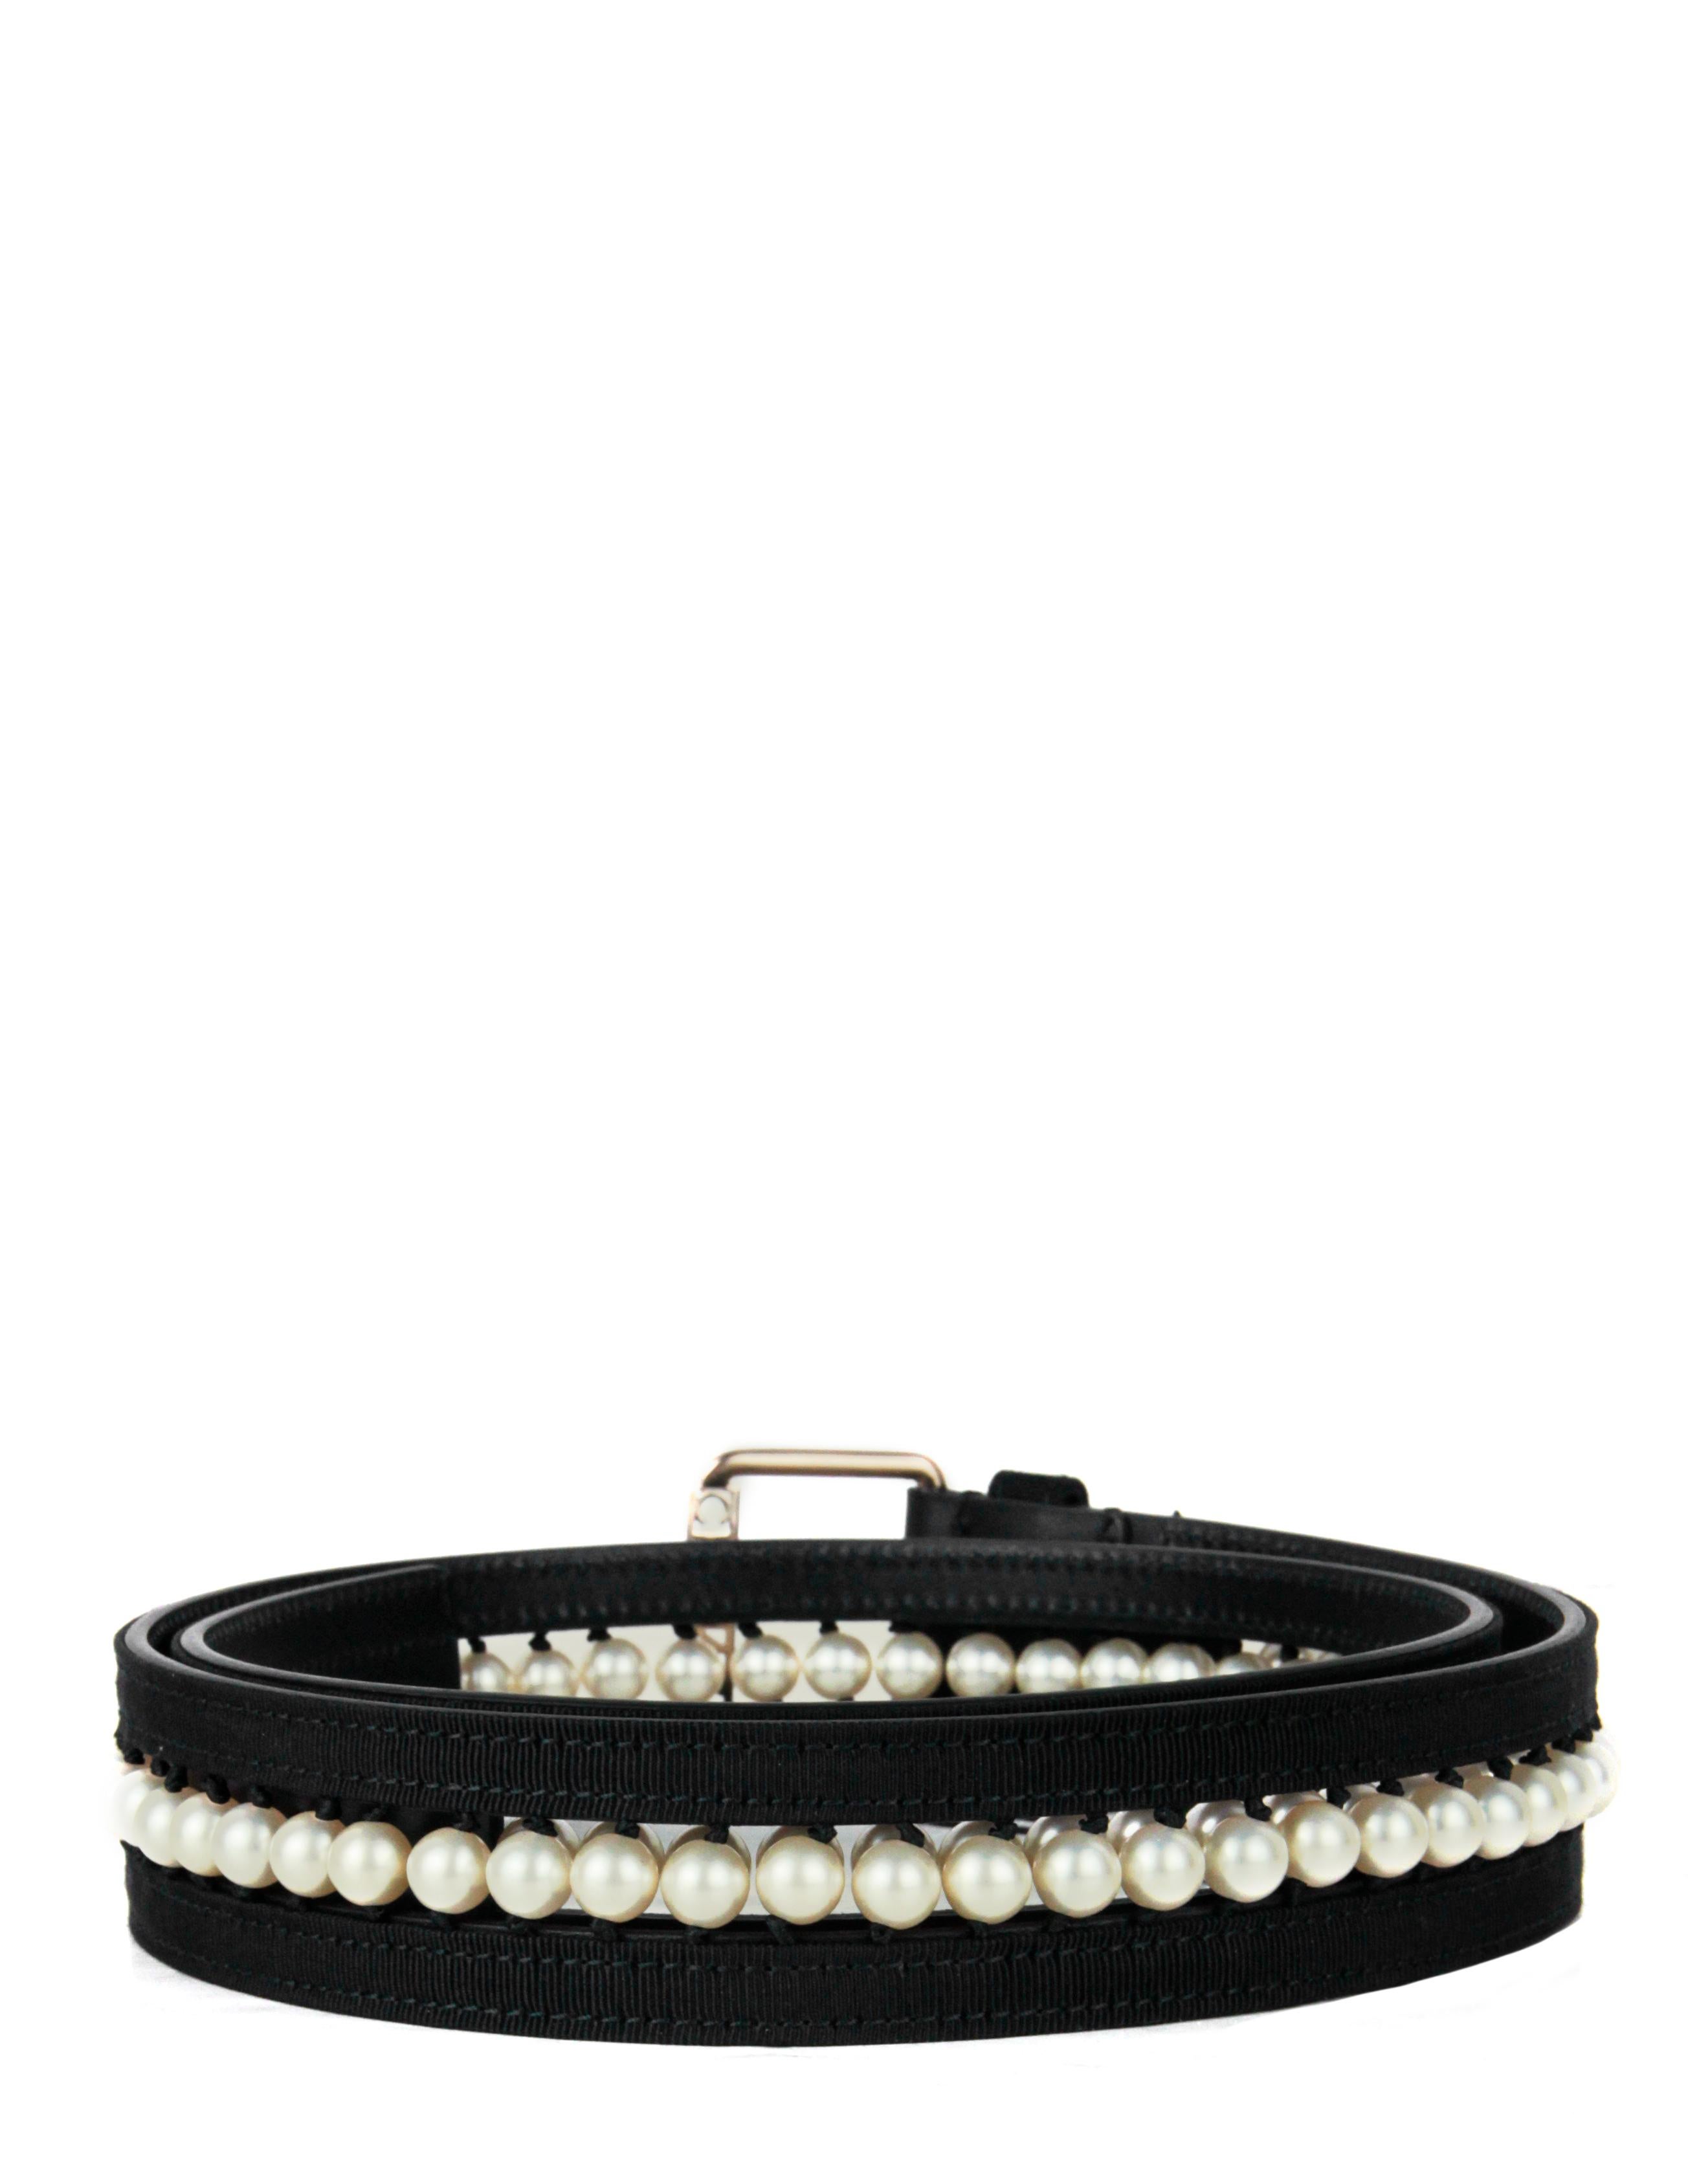 Chanel NWT Black Leather & Grosgrain Pearl Belt sz 90 rt. $1, 850 In New Condition In New York, NY